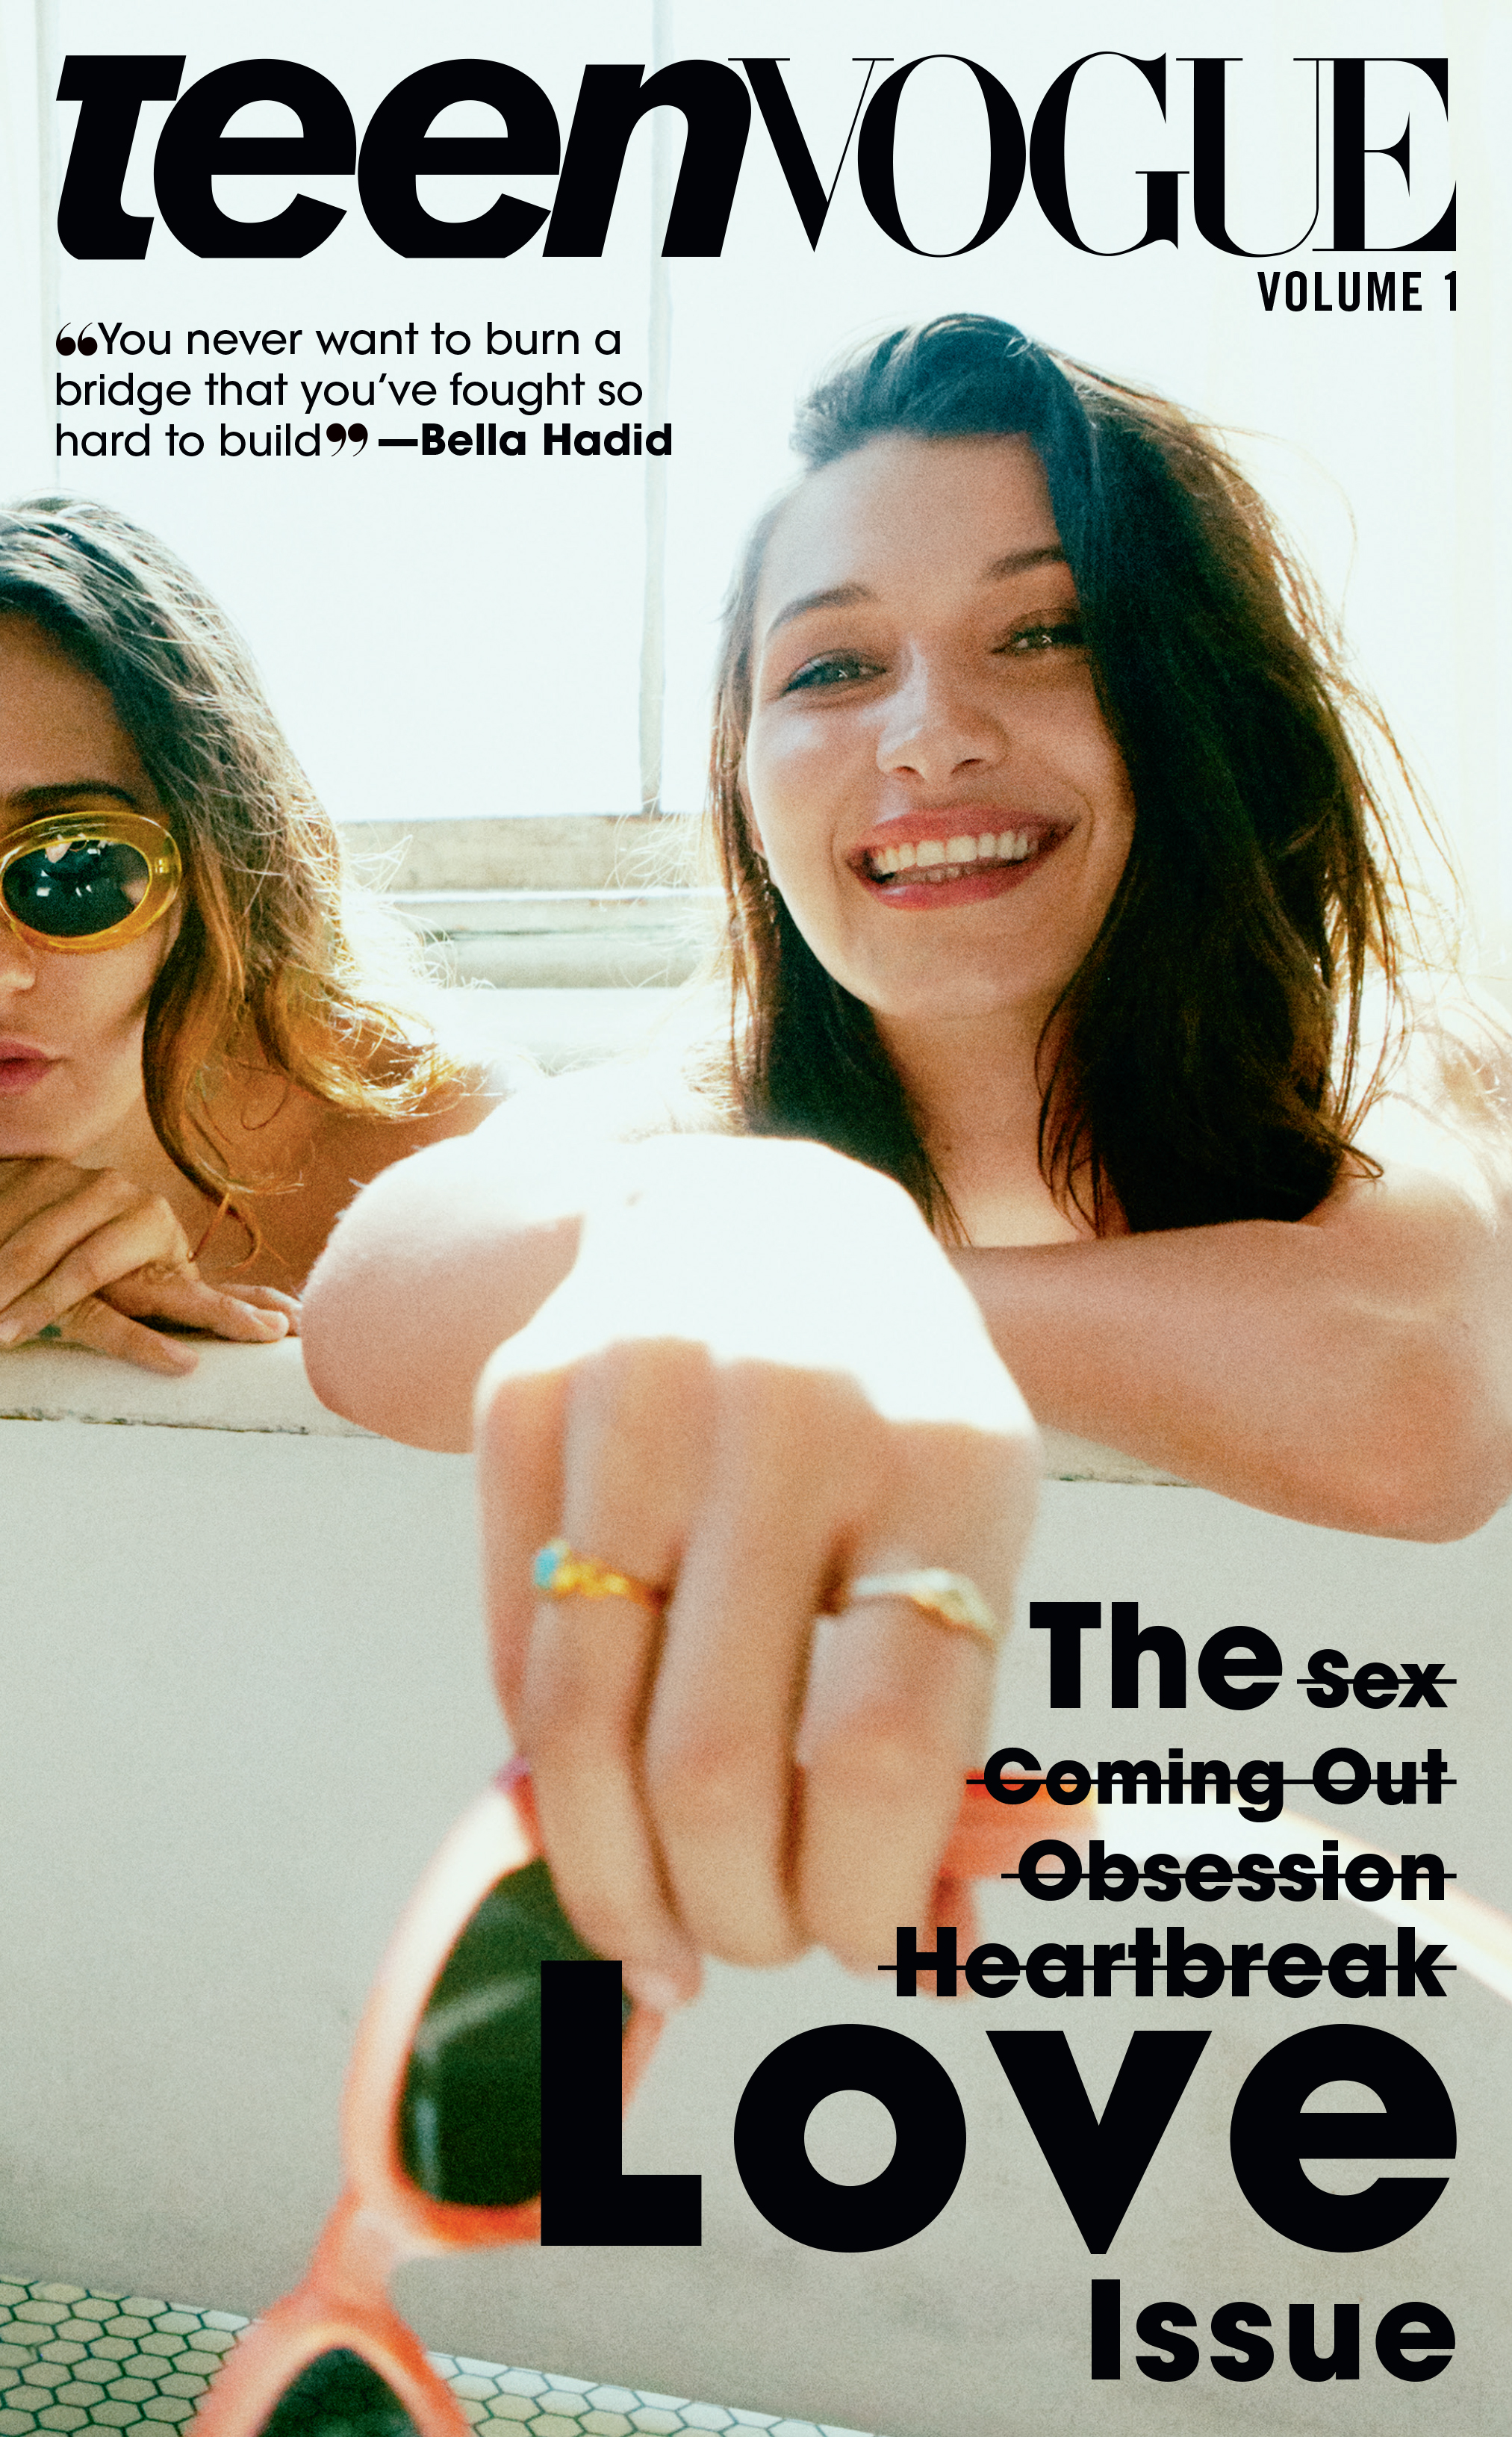 Bella Hadid on the cover of Teen Vogue